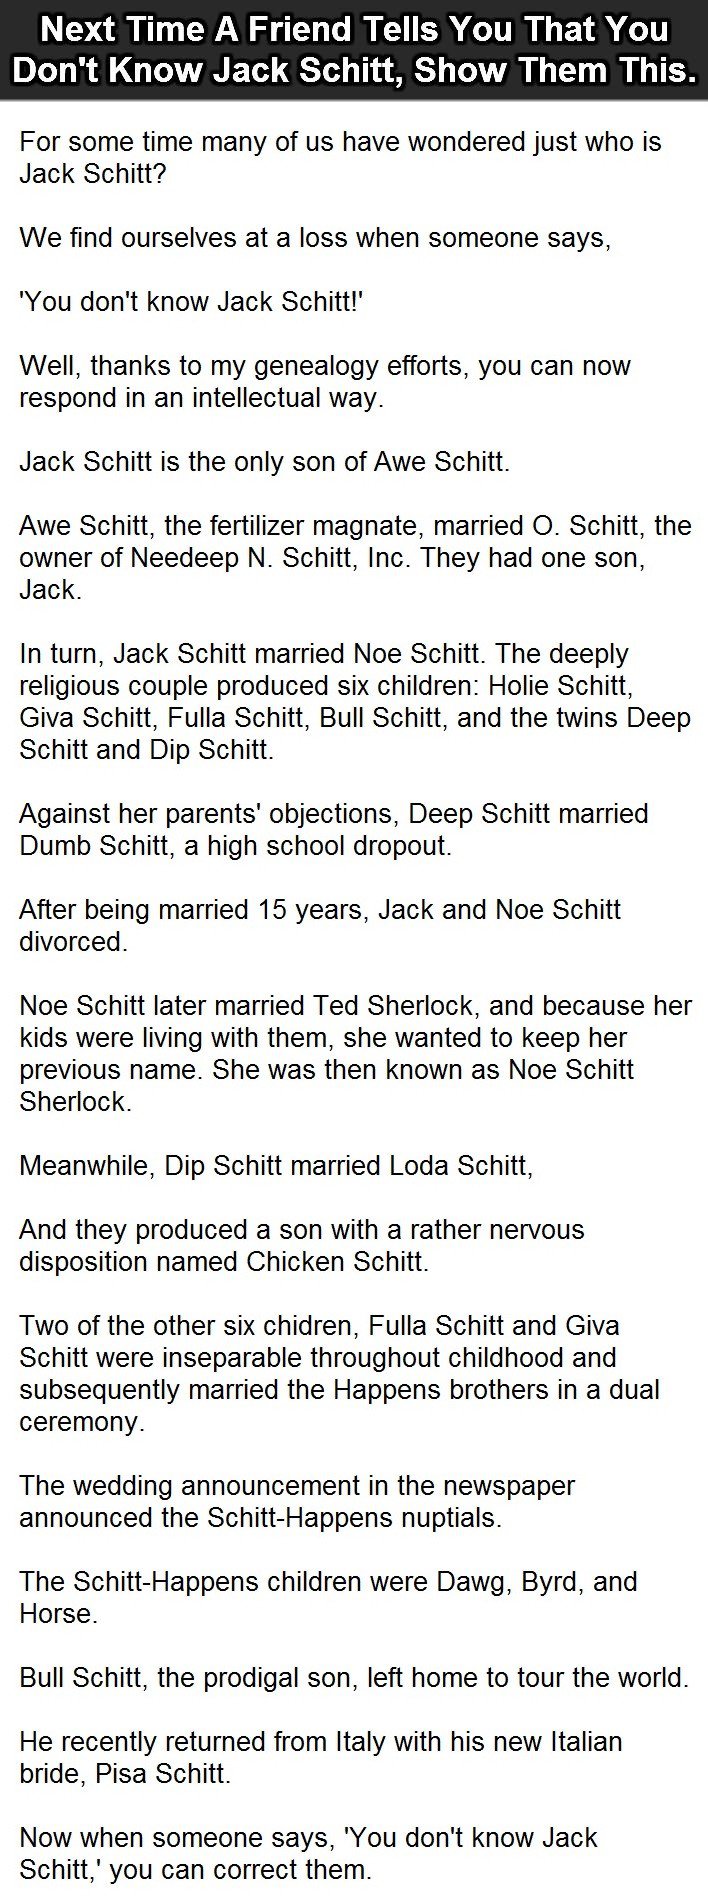 Next time a friend tells you that you dont know jack schitt, show them this